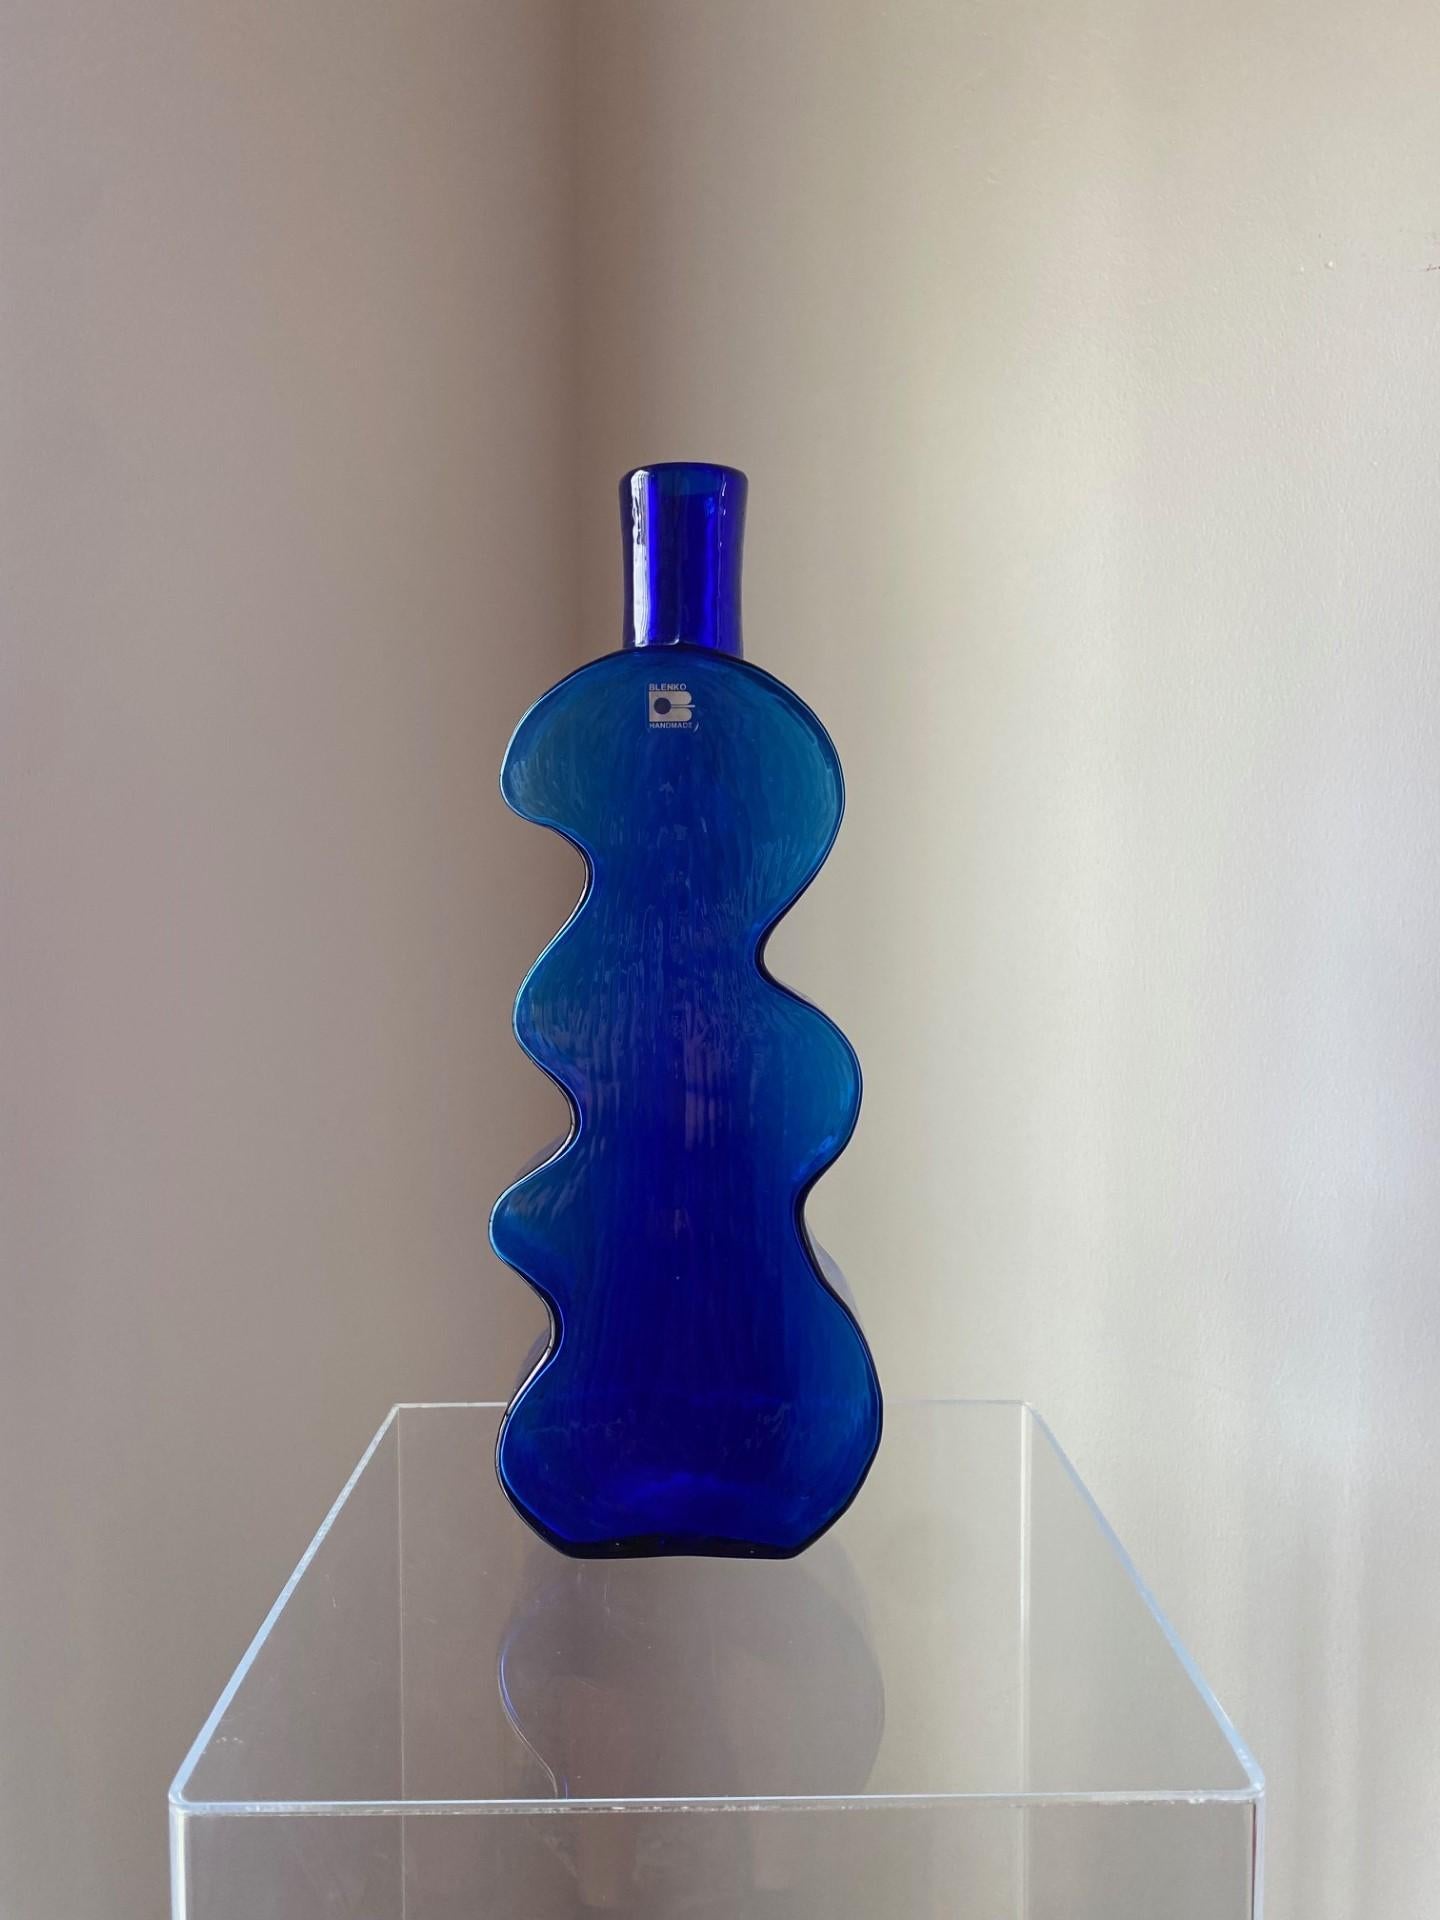 Vintage and unique piece. Beautiful art glass vase shaped as a puzzle piece by Blenko. This glass vase is sculptural and evocative. The beautifully crafted glass is shaped to capture form and style. The glass is pristine and decadent in a deep blue